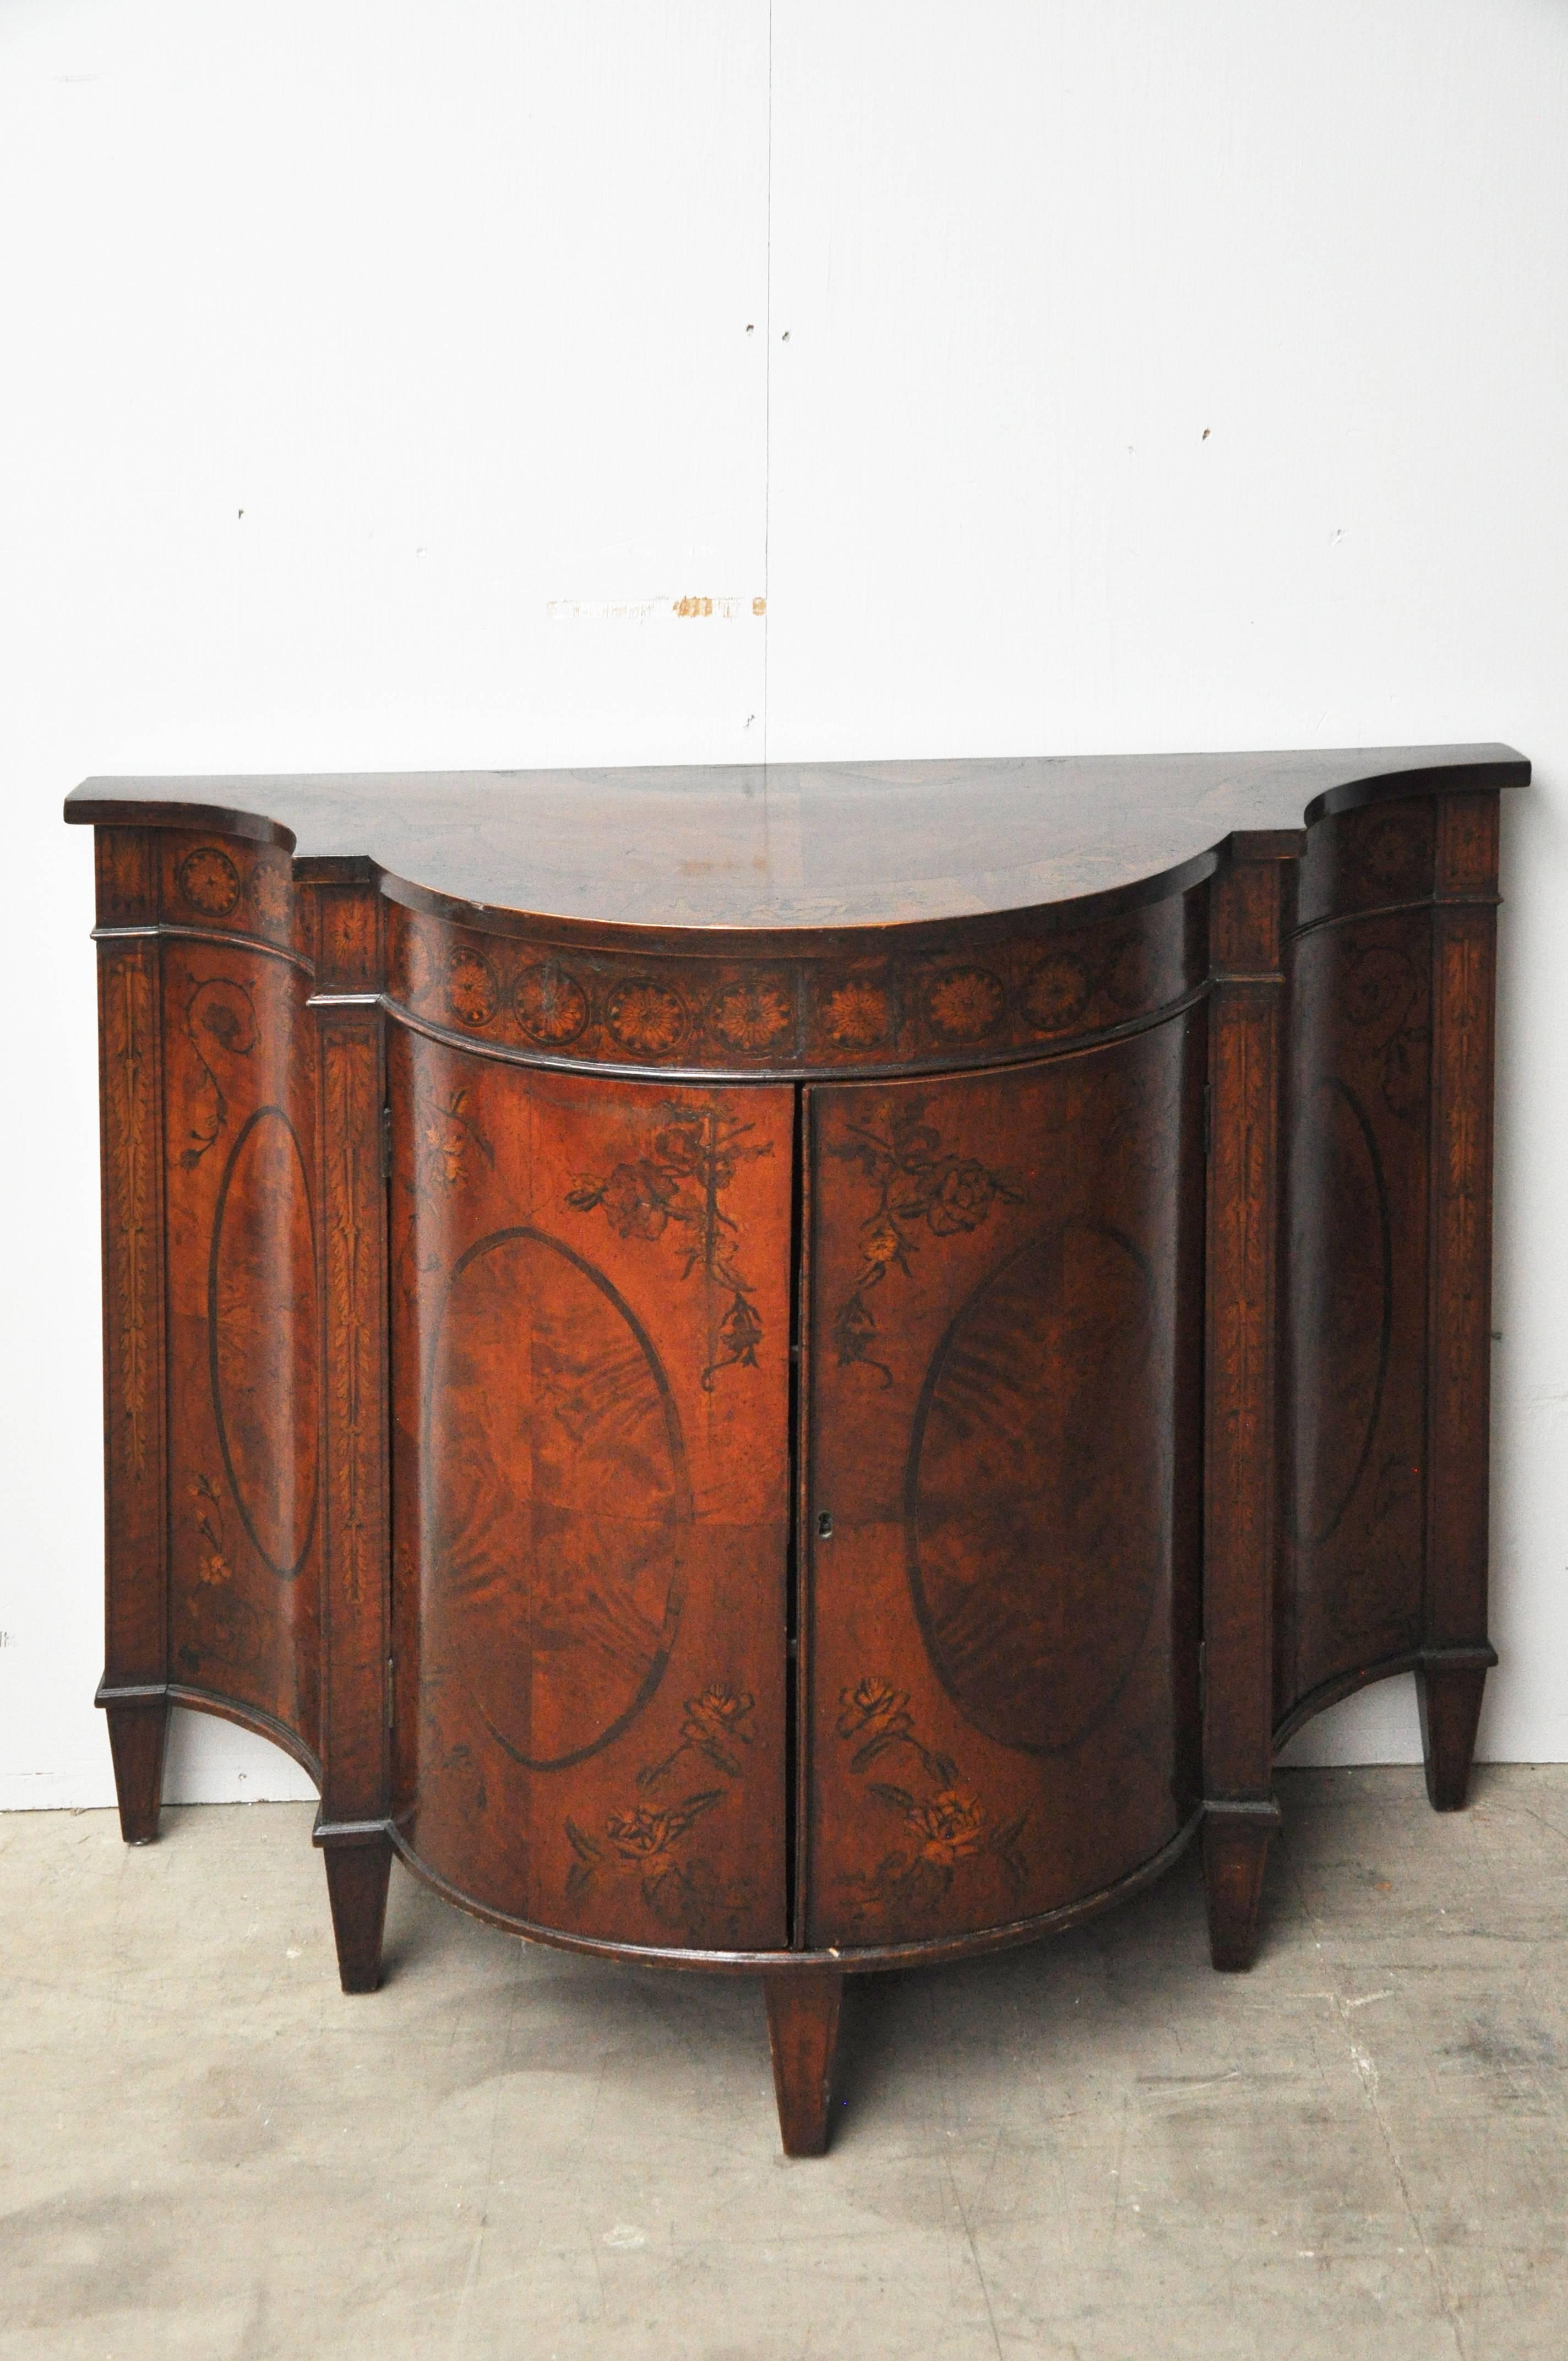 Amazing European Continental curved serpentine cabinet with lovely inlay.